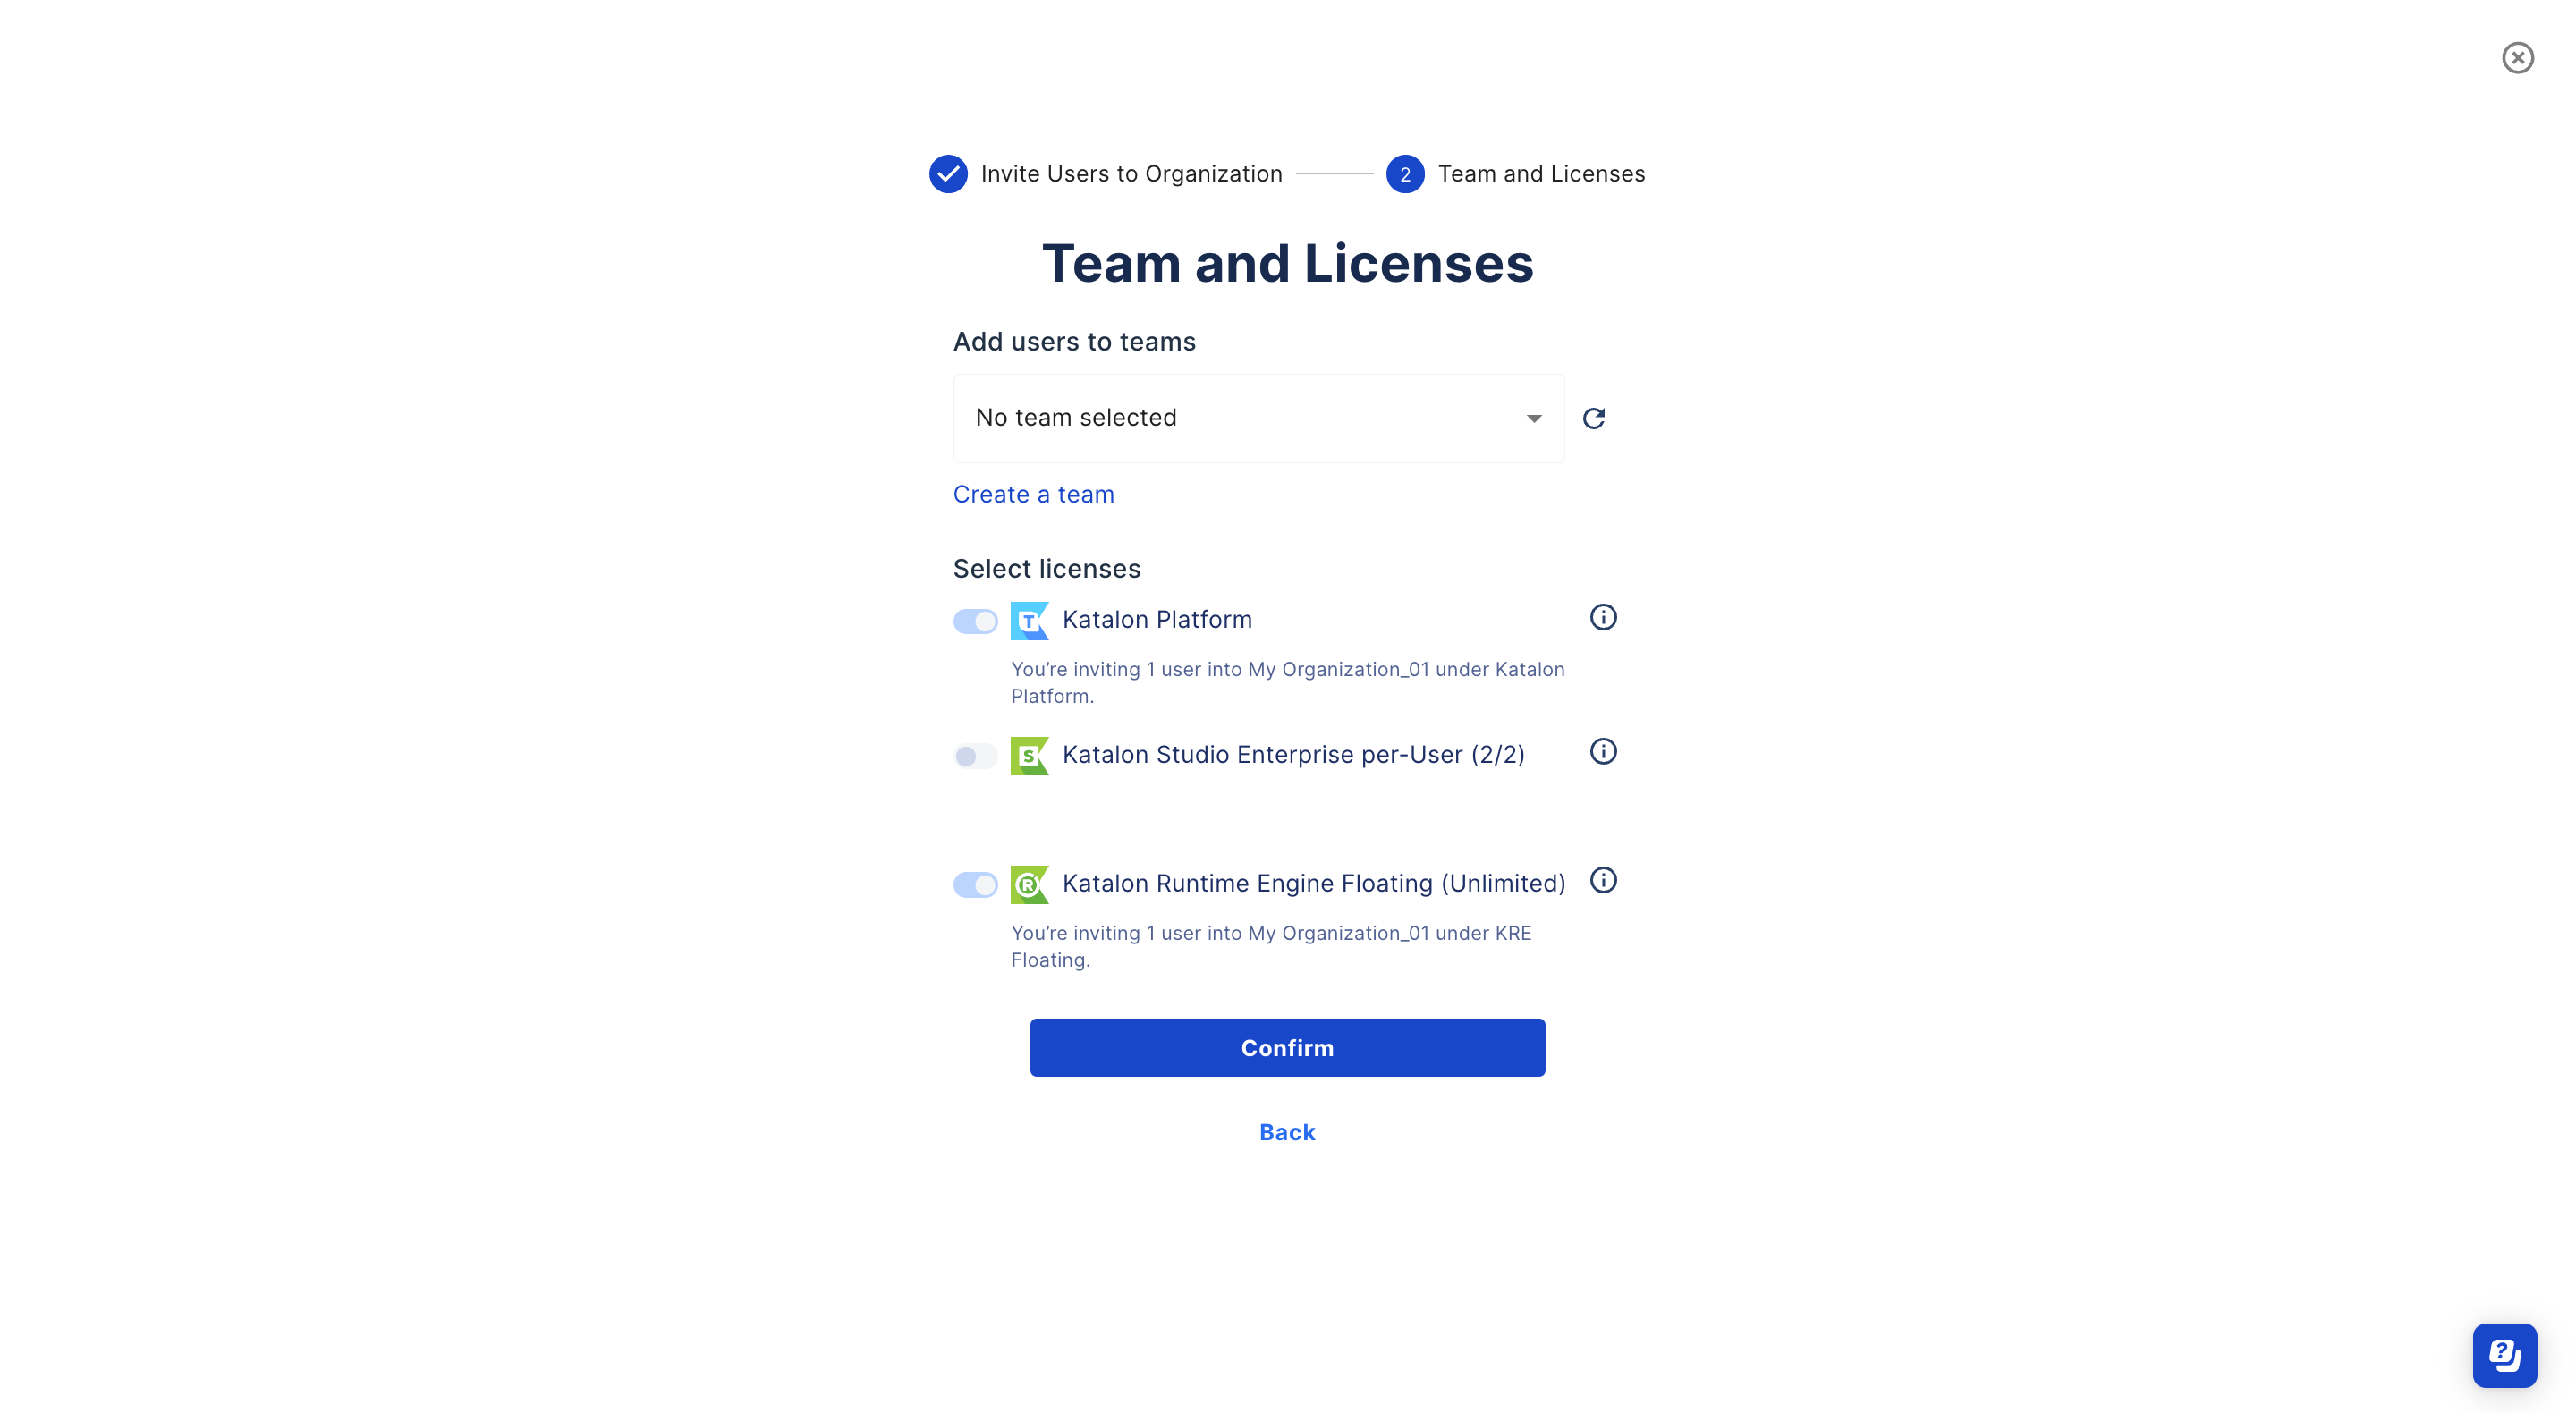 Add users to Teams and Licenses